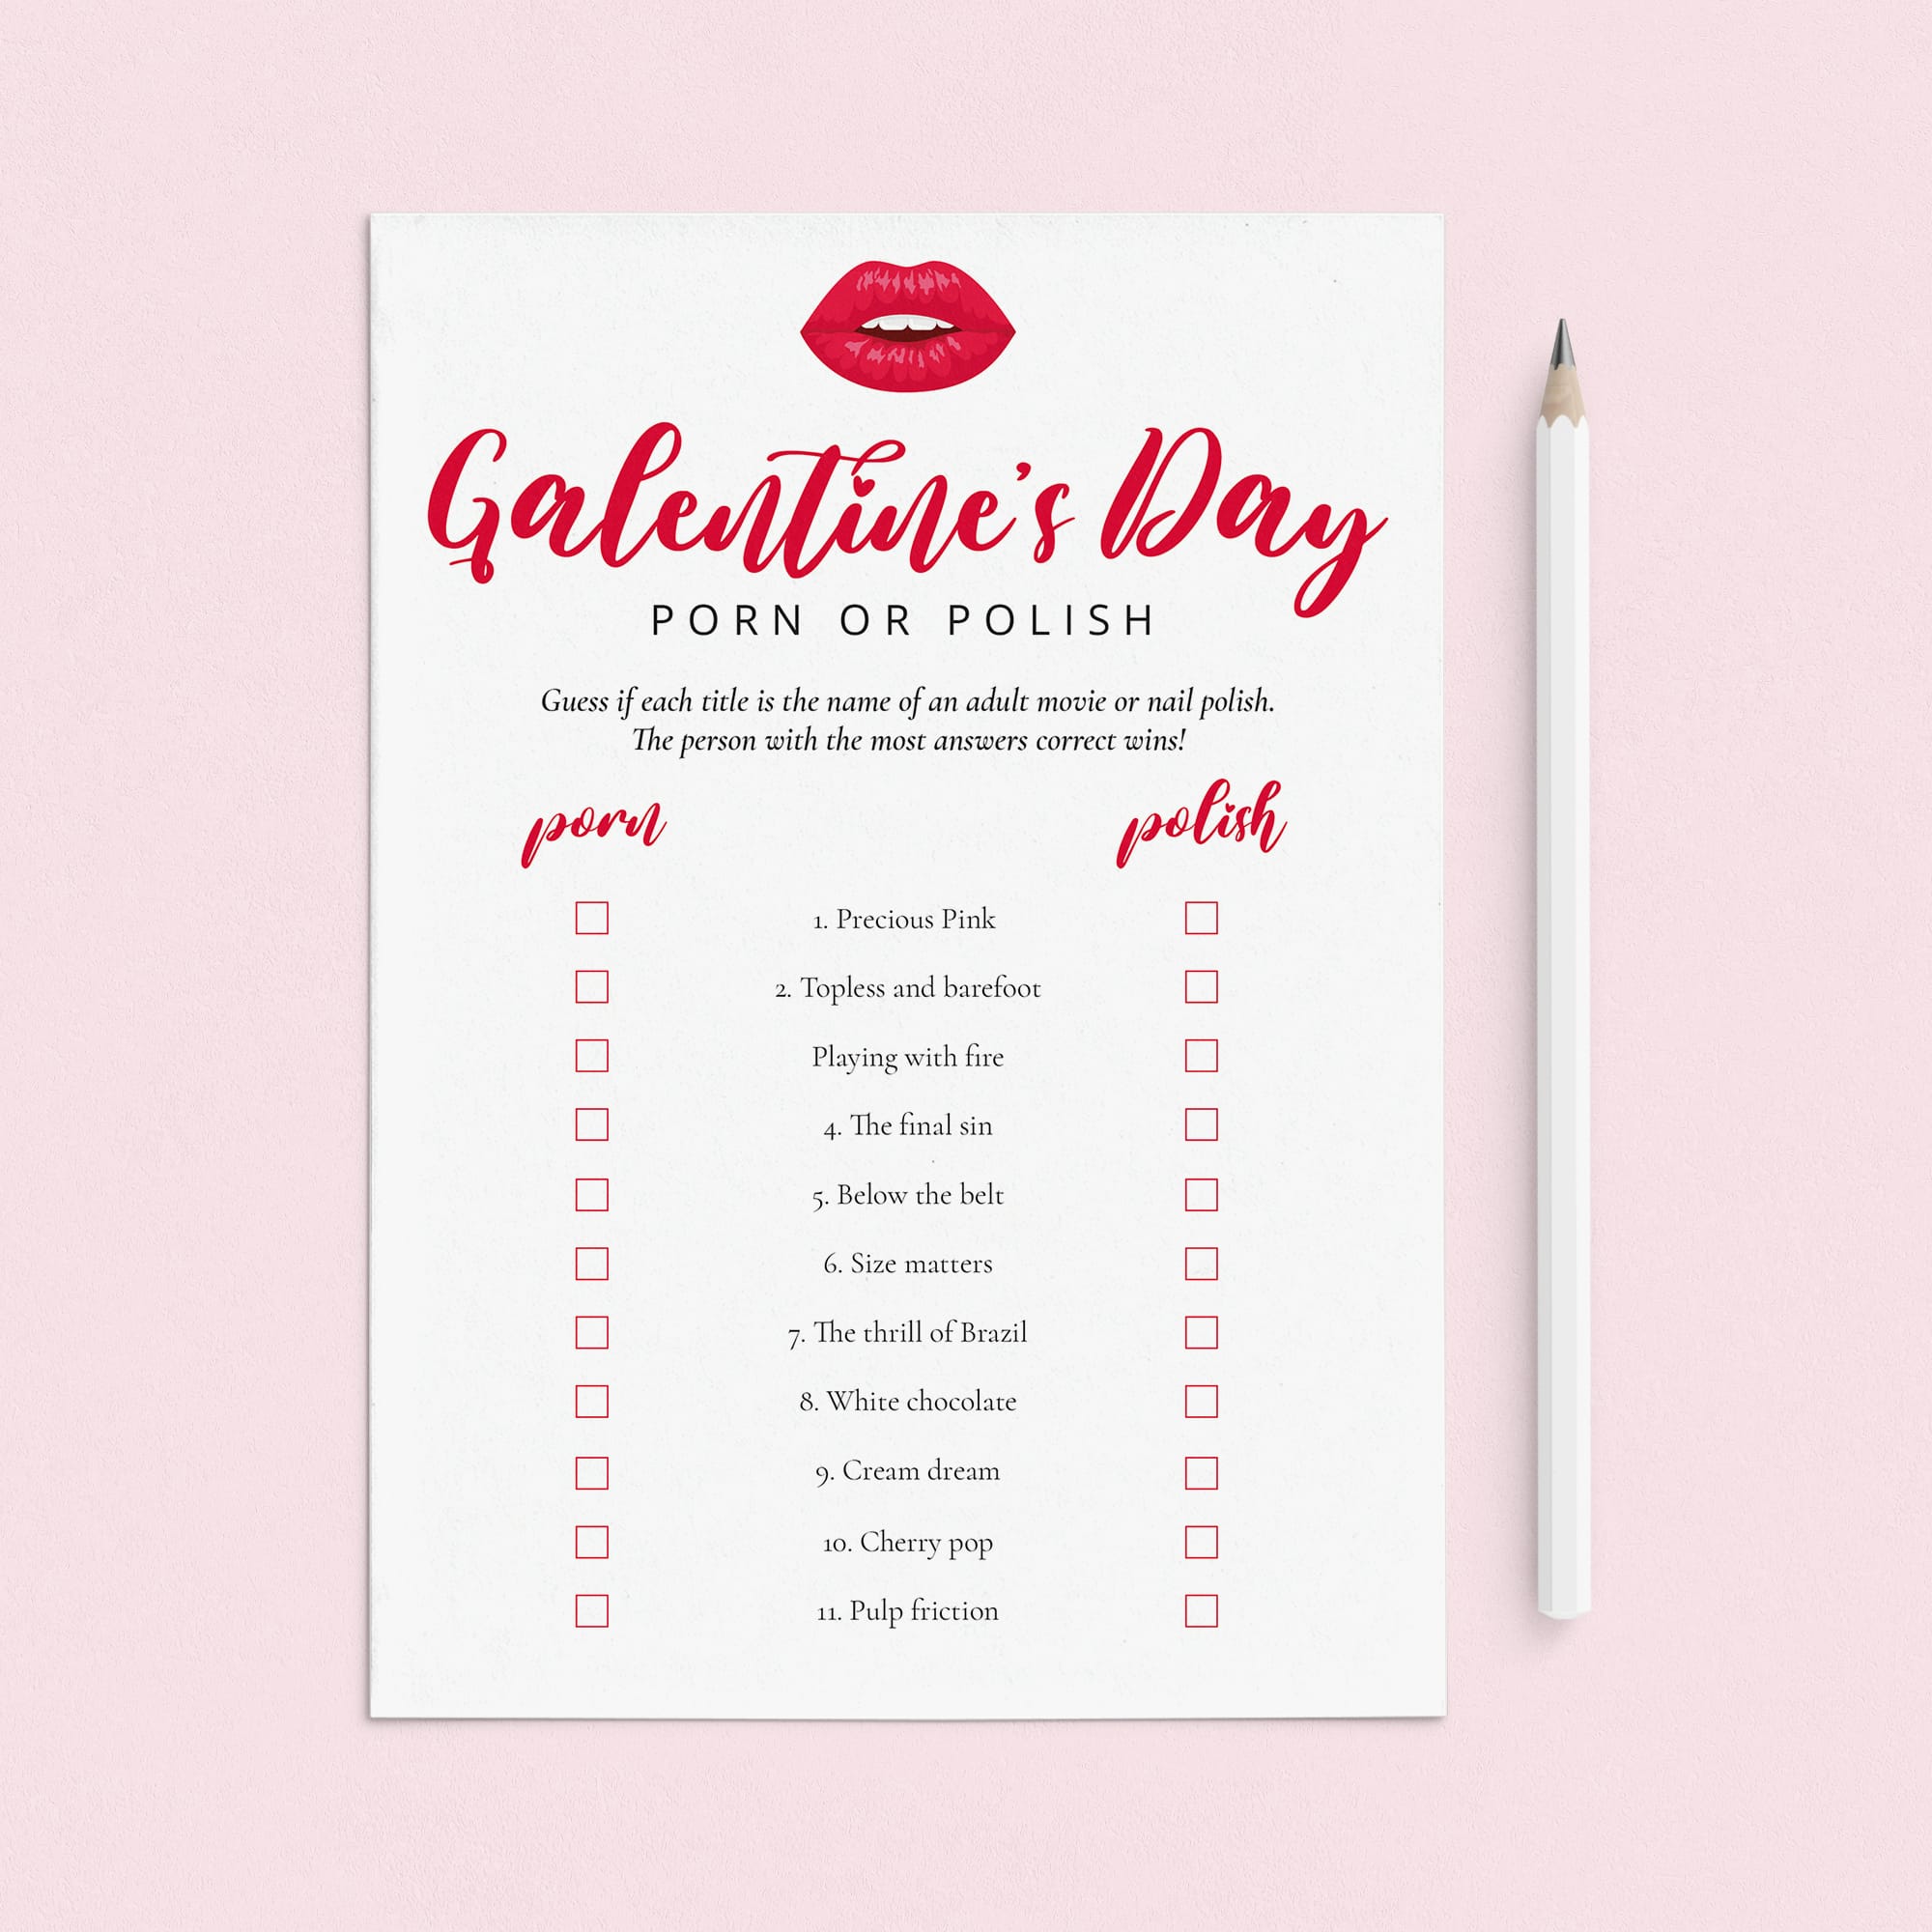 Porn or Polish Galentines Day Game with Answer Key Printable by LittleSizzle